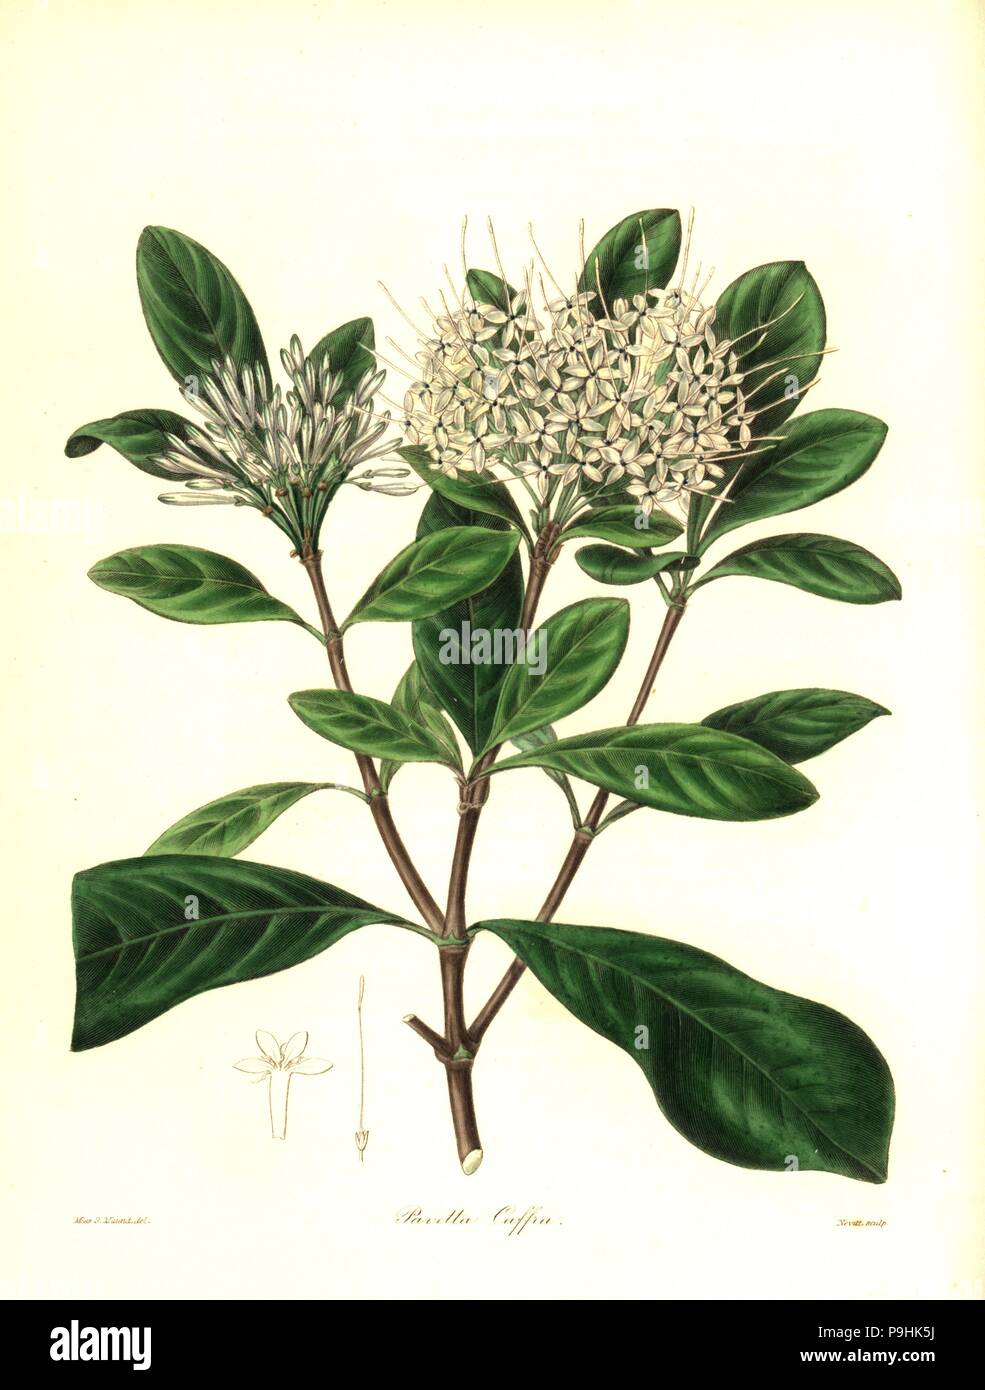 Pavetta capensis (South African pavetta, Pavetta caffra). Handcoloured copperplate engraving by S. Nevitt after a botanical illustration by Miss Sara Maund from Benjamin Maund and the Rev. John Stevens Henslow's The Botanist, London, 1836. Stock Photo